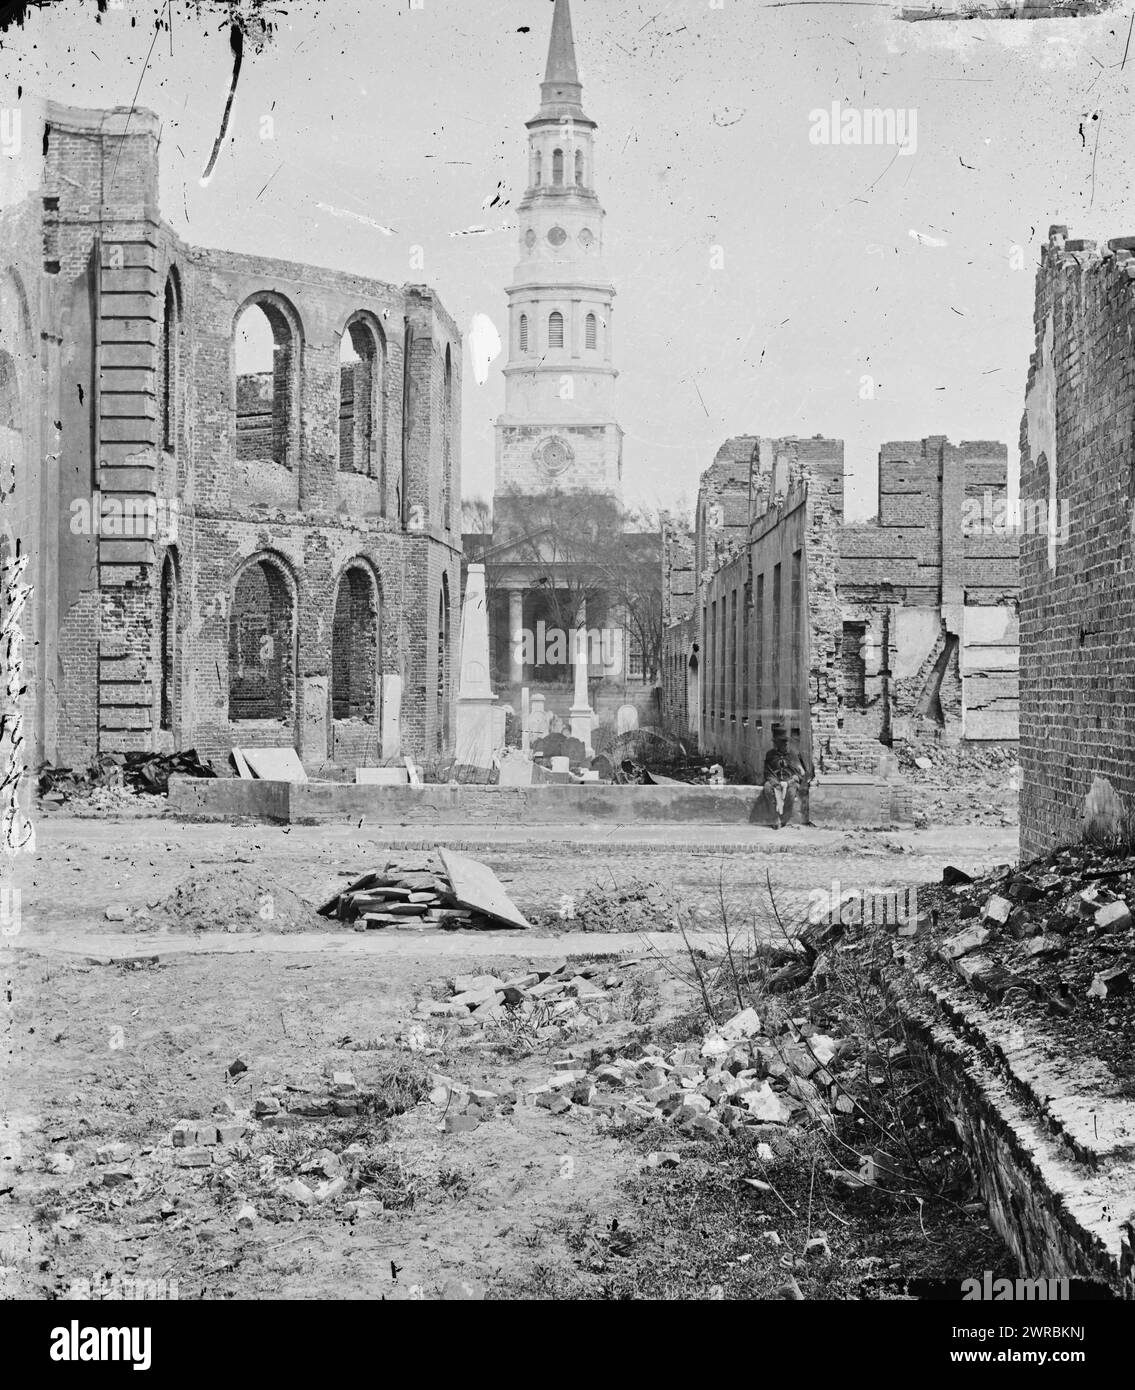 Charleston, South Carolina. Ruins of Cathedral of St. John and St. Finbar and Secession Hall, Barnard, George N., 1819-1902, photographer, 1865 April, United States, History, Civil War, 1861-1865, Glass negatives, 1860-1870., Stereographs, 1860-1870, Glass negatives, 1860-1870, 2 negatives (3 plates): glass, stereograph, wet collodion Stock Photo